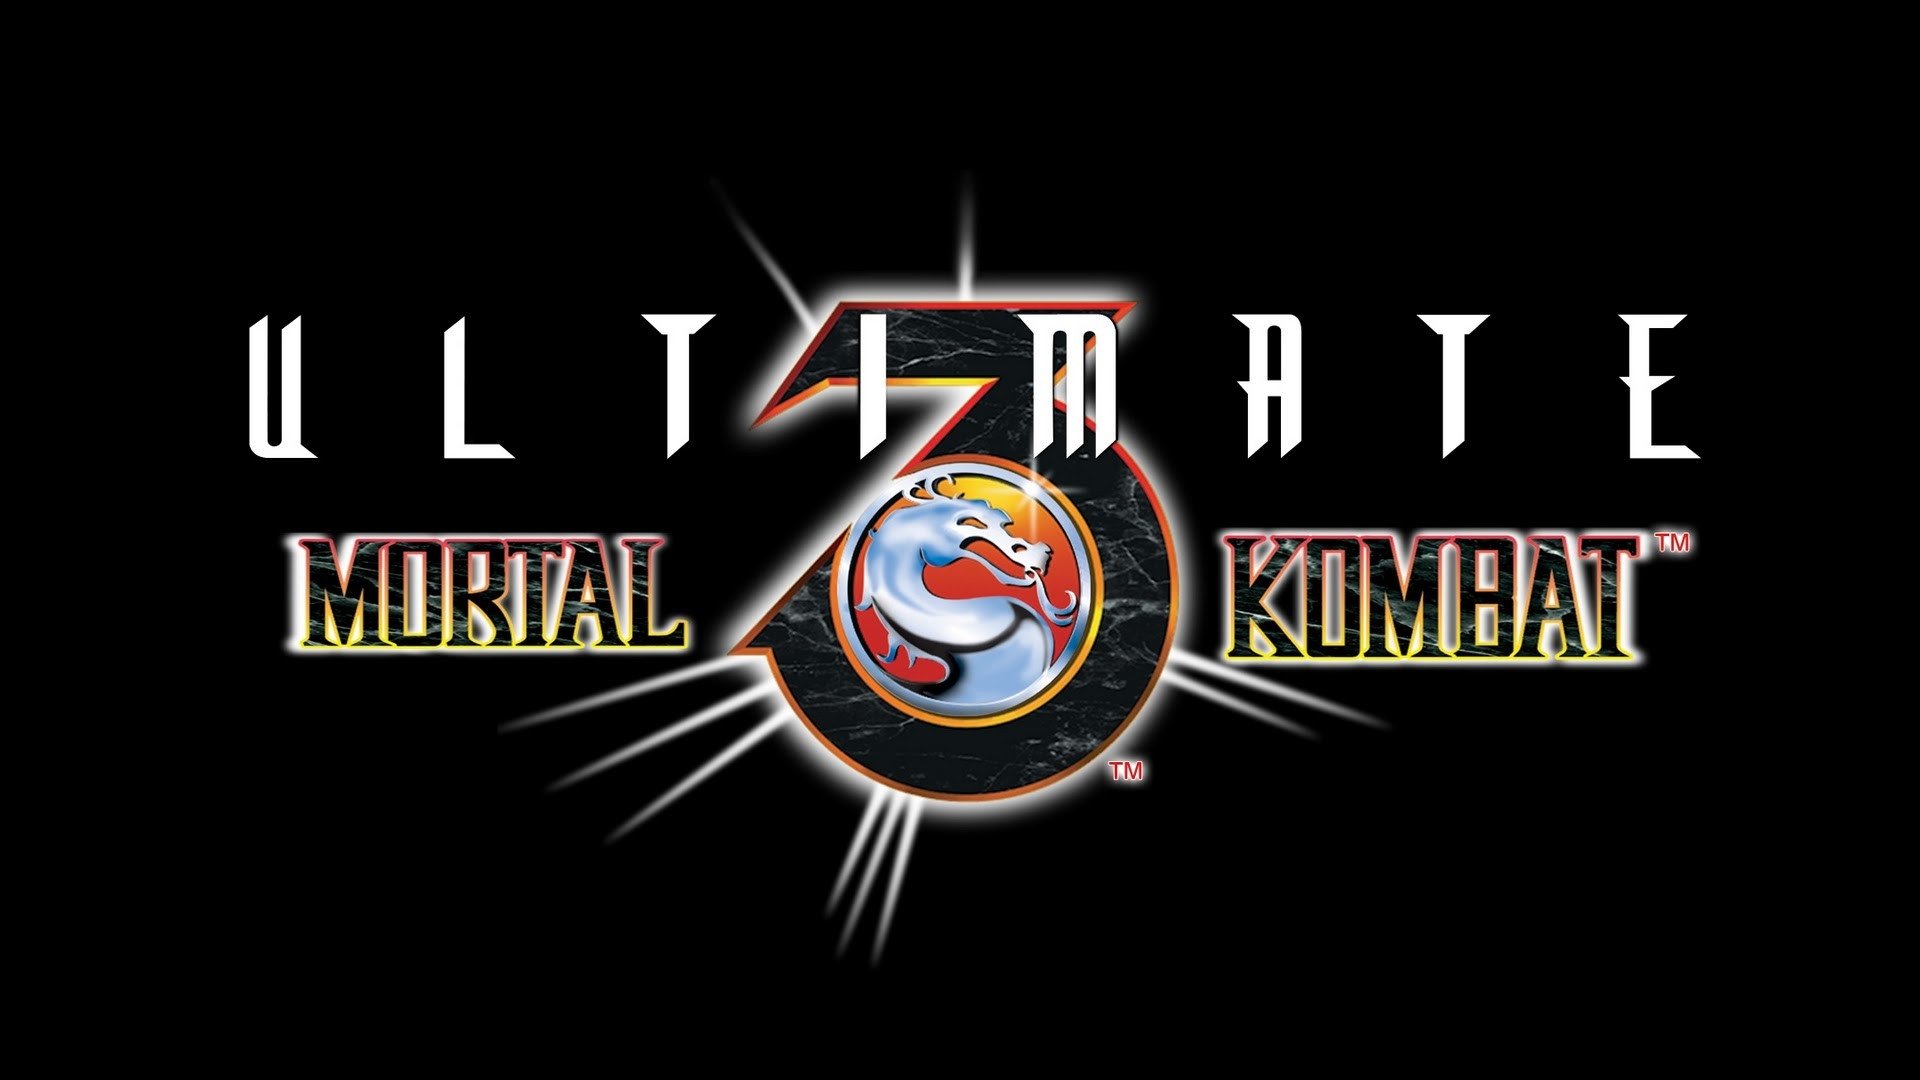 Ultimate Mortal Kombat 3 HD Wallpapers Background Images 1920x1080